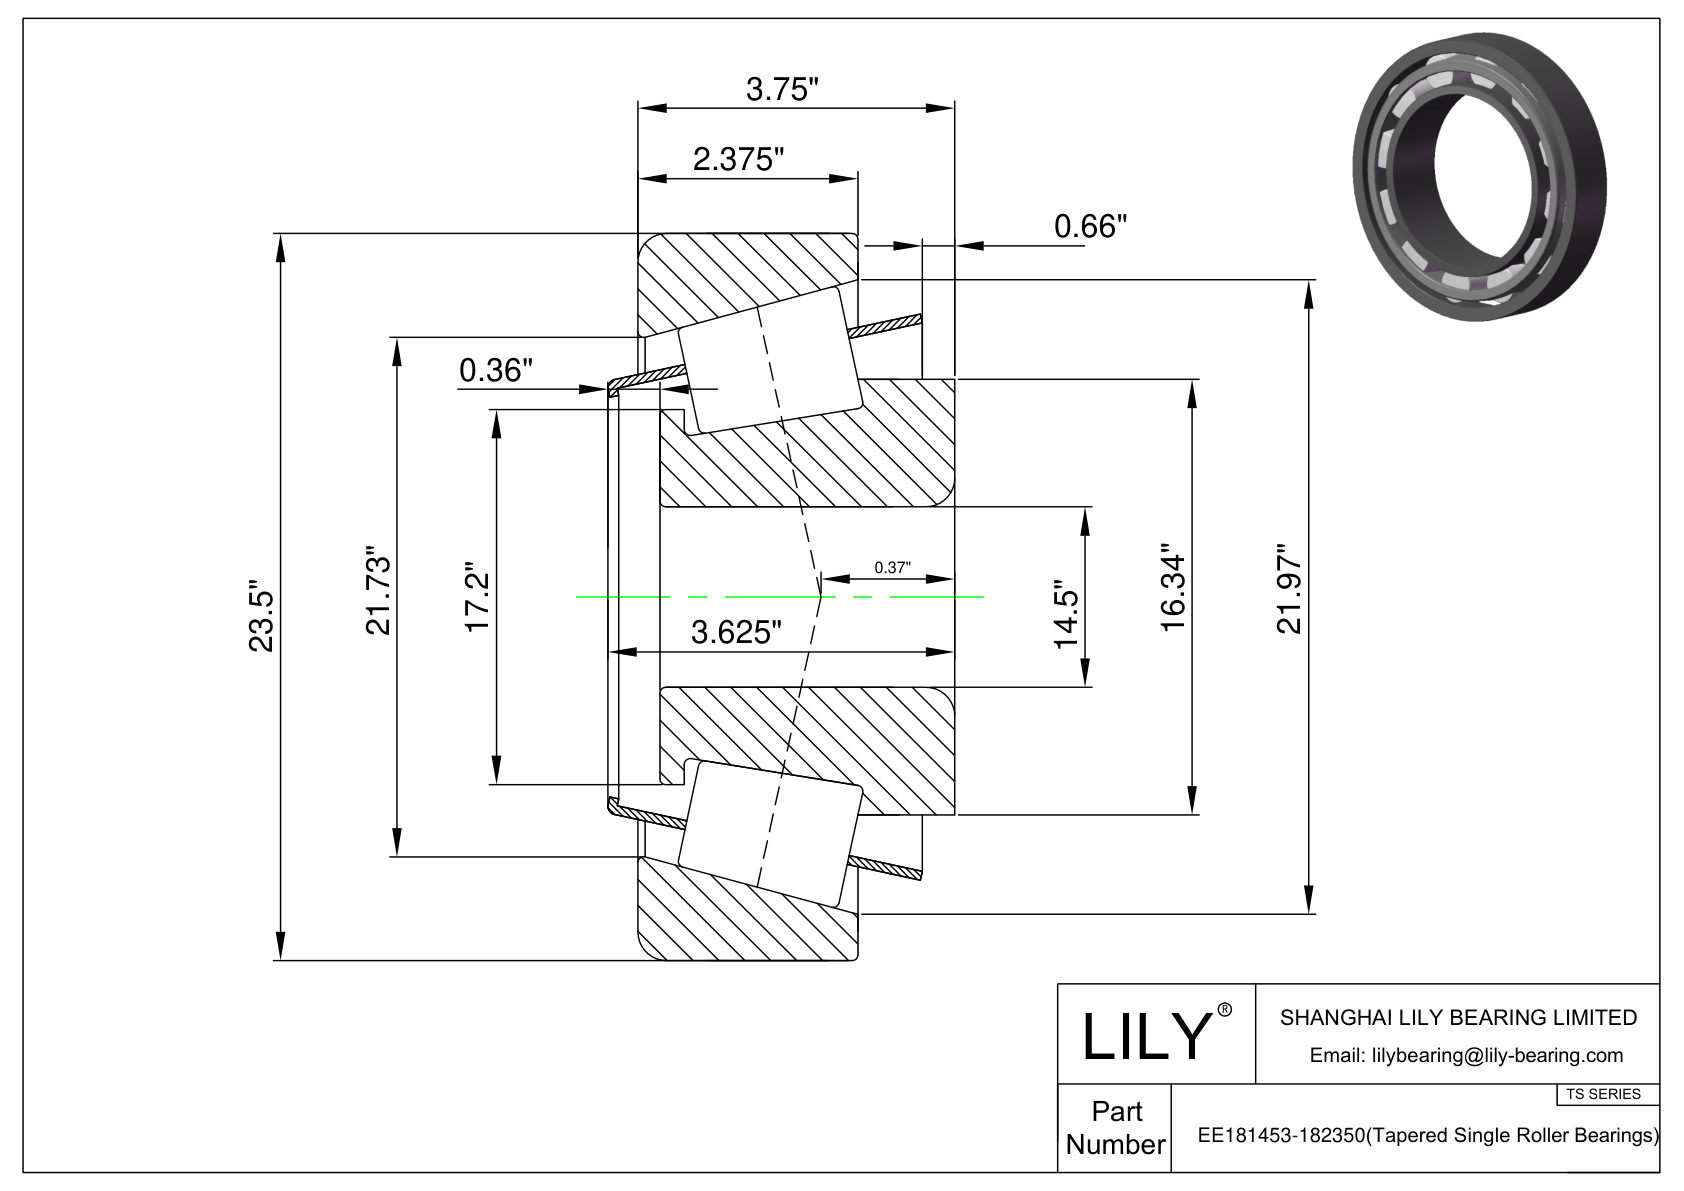 EE181453-182350 TS (Tapered Single Roller Bearings) (Imperial) cad drawing